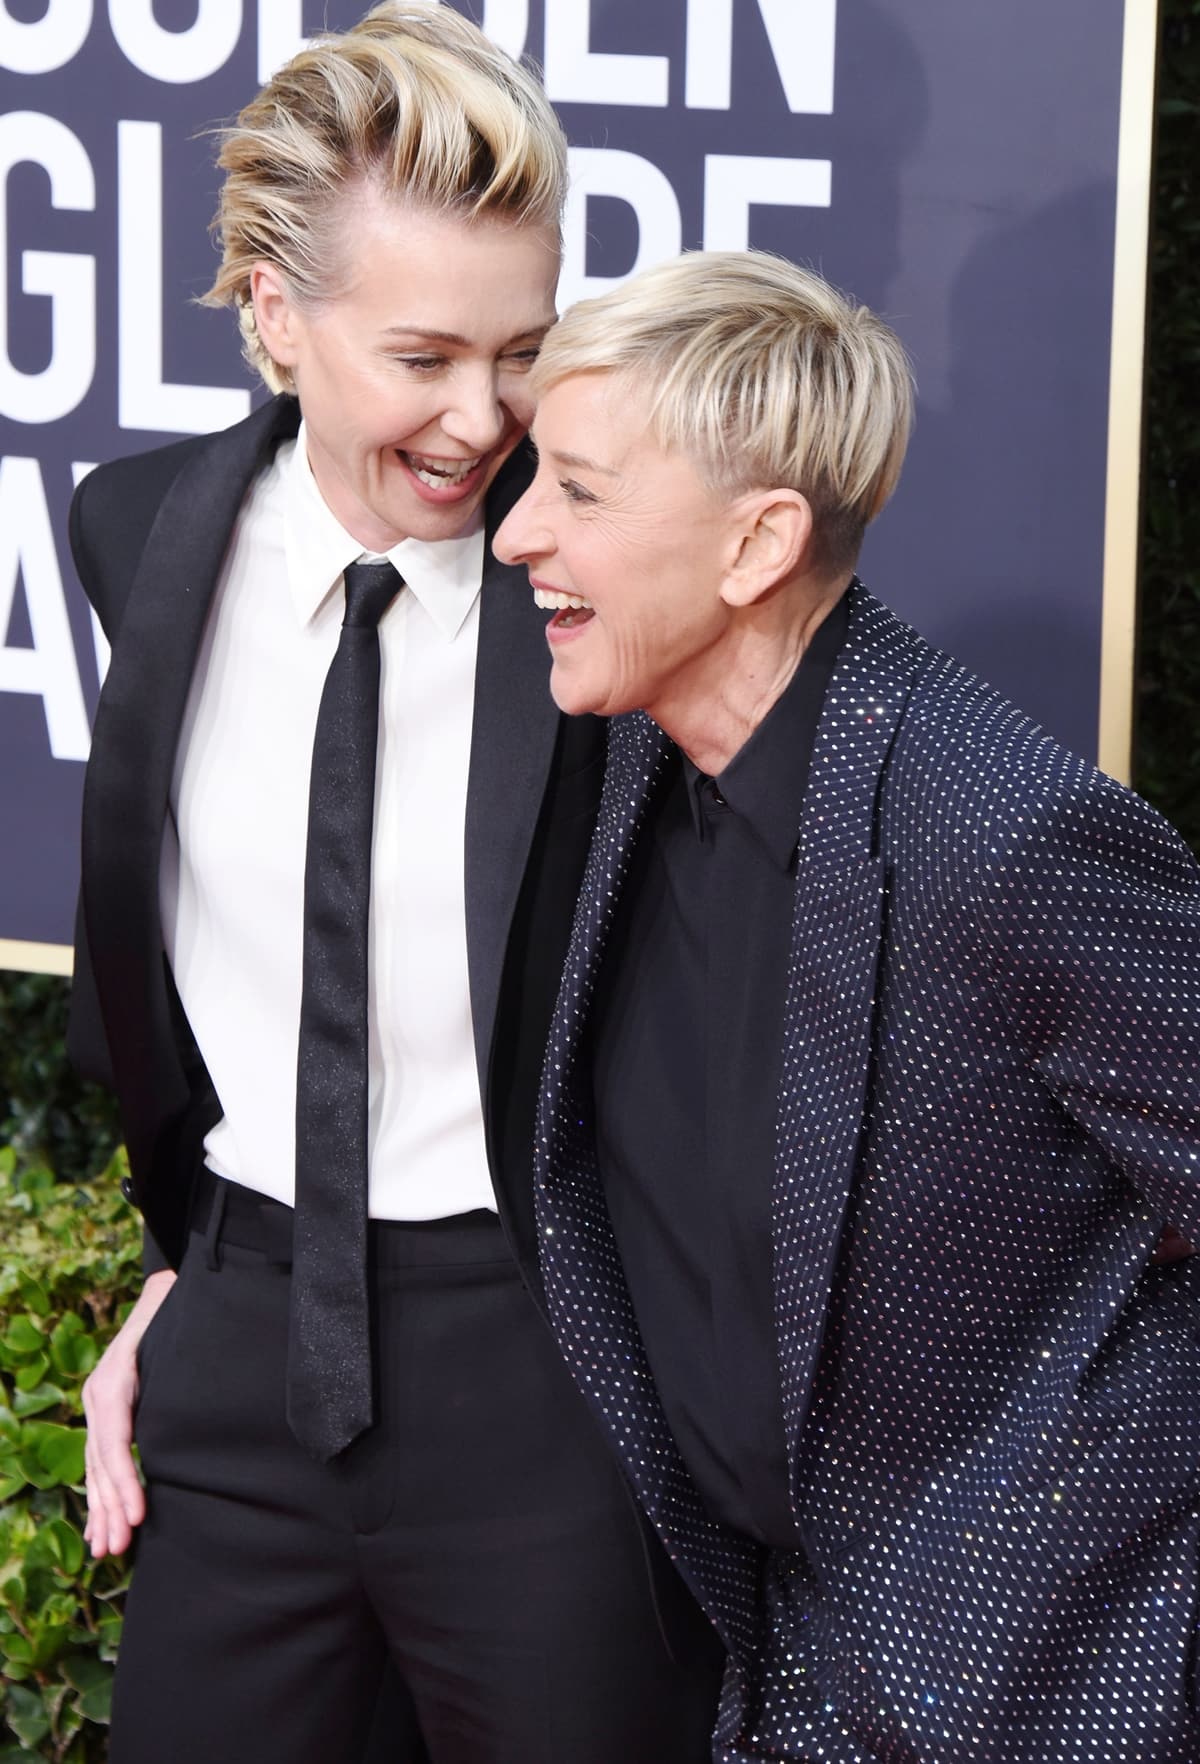 Portia de Rossi and Ellen Degeneres clearly did not think about divorcing when attending the 77th Annual Golden Globe Awards